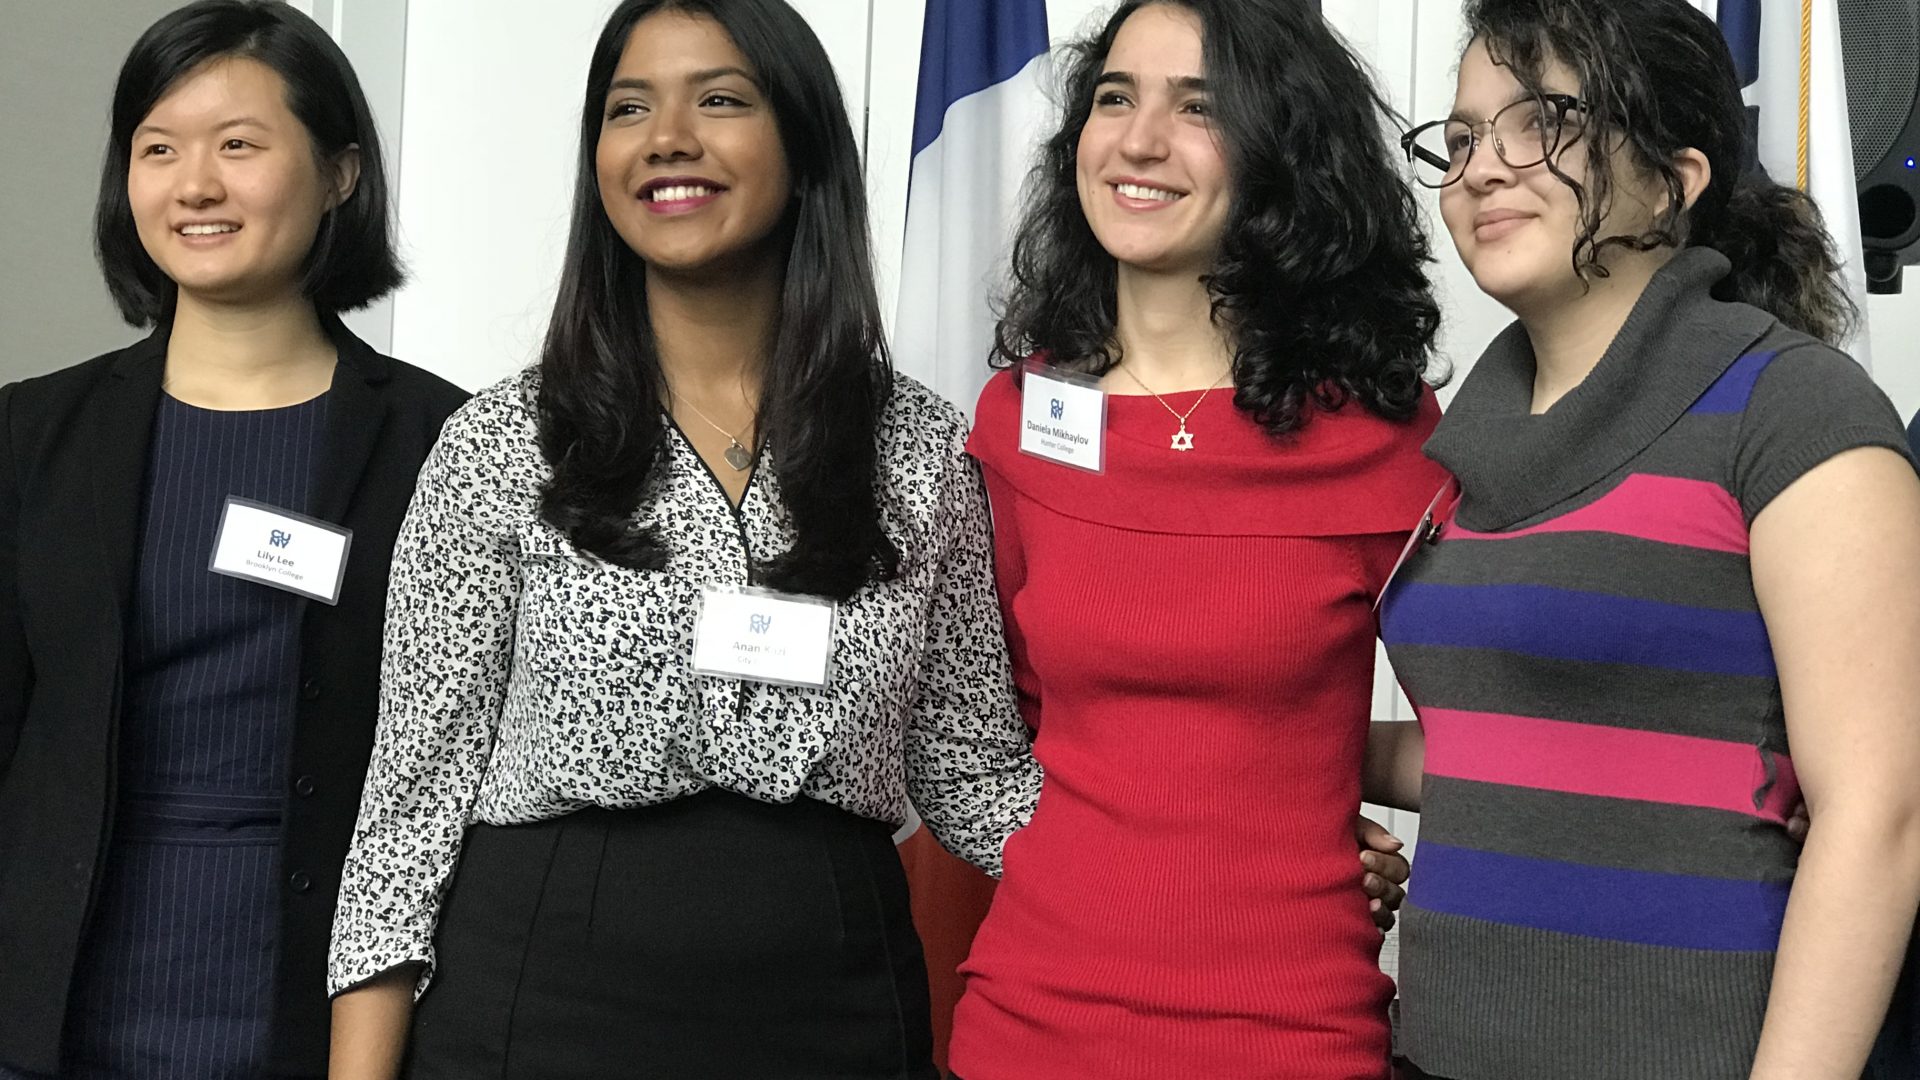 Lily Lee (Brooklyn), Anan Kazi '18 (City), Daniela Mikhaylov (Hunter) & Lisset A. Duran (John Jay) lauded for receiving Jonas E. Salk Scholarships to support future careers in medicine!